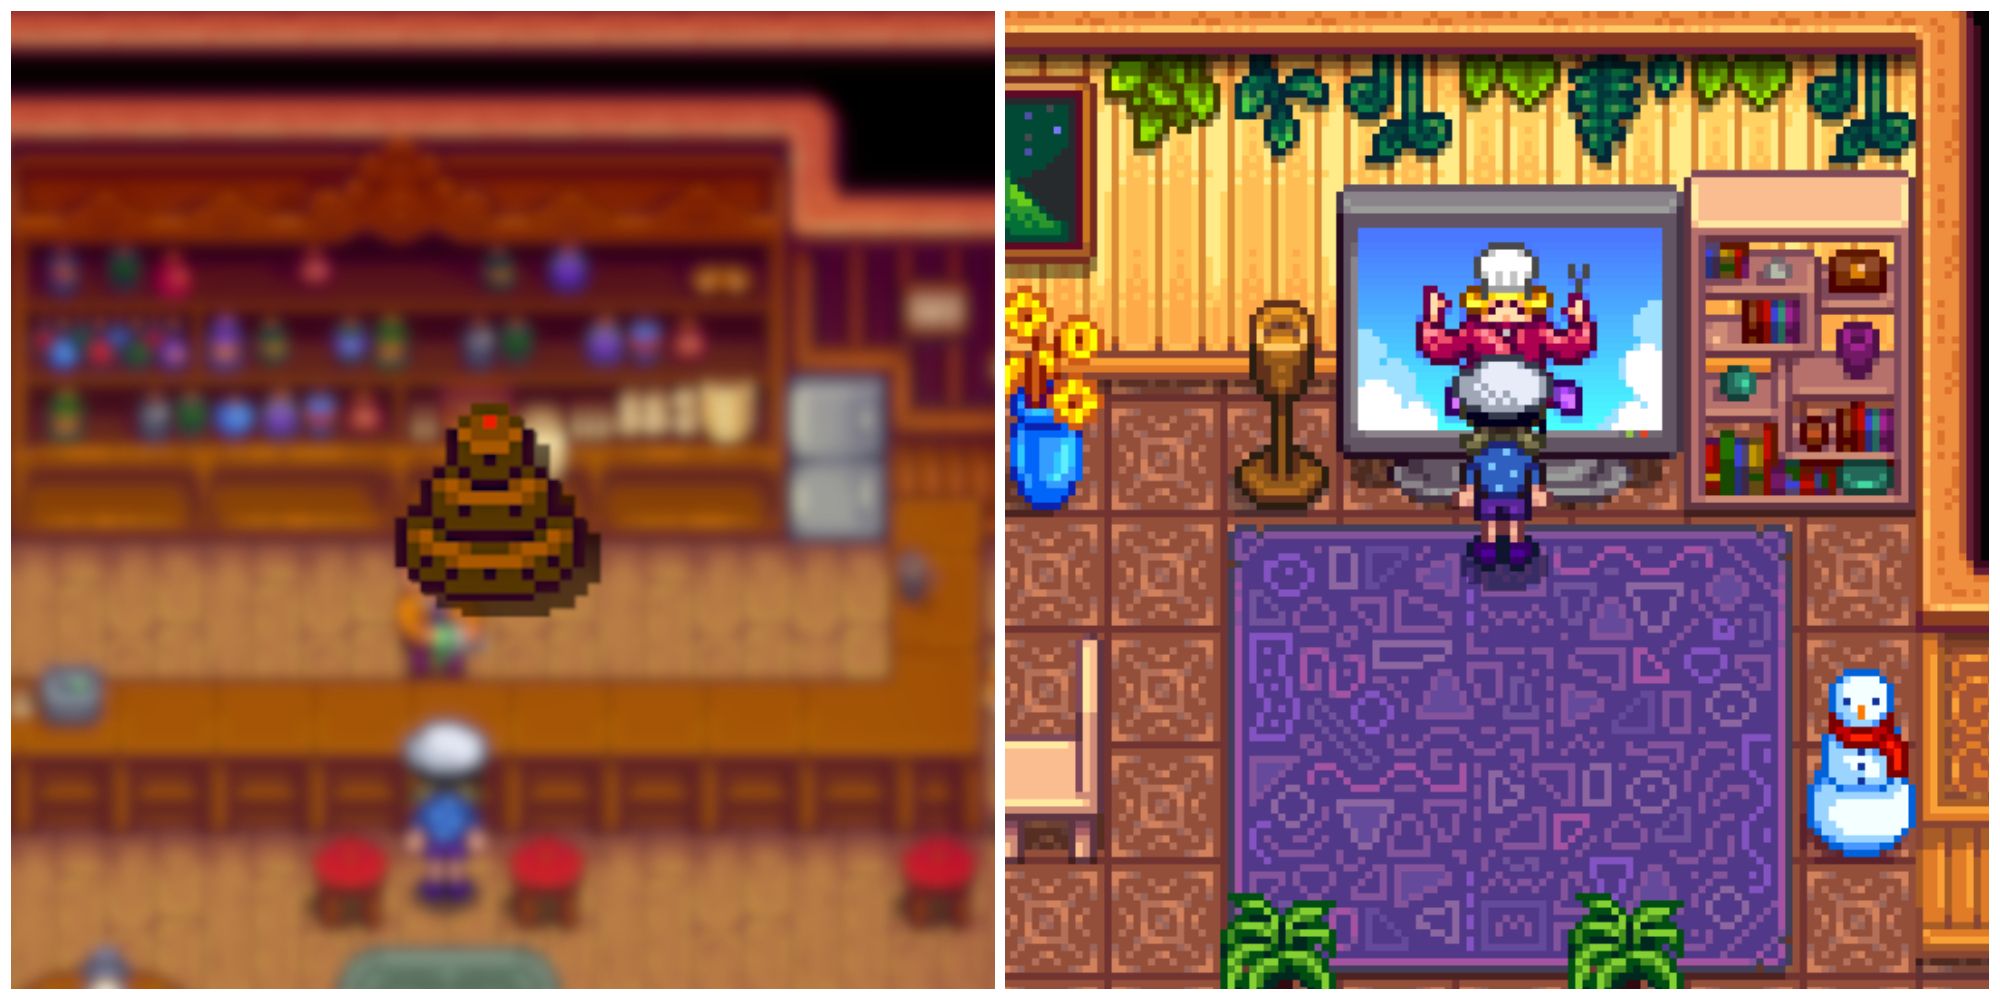 Split image of a chocolate cake and a character watching The Queen of Sauce in Stardew Valley